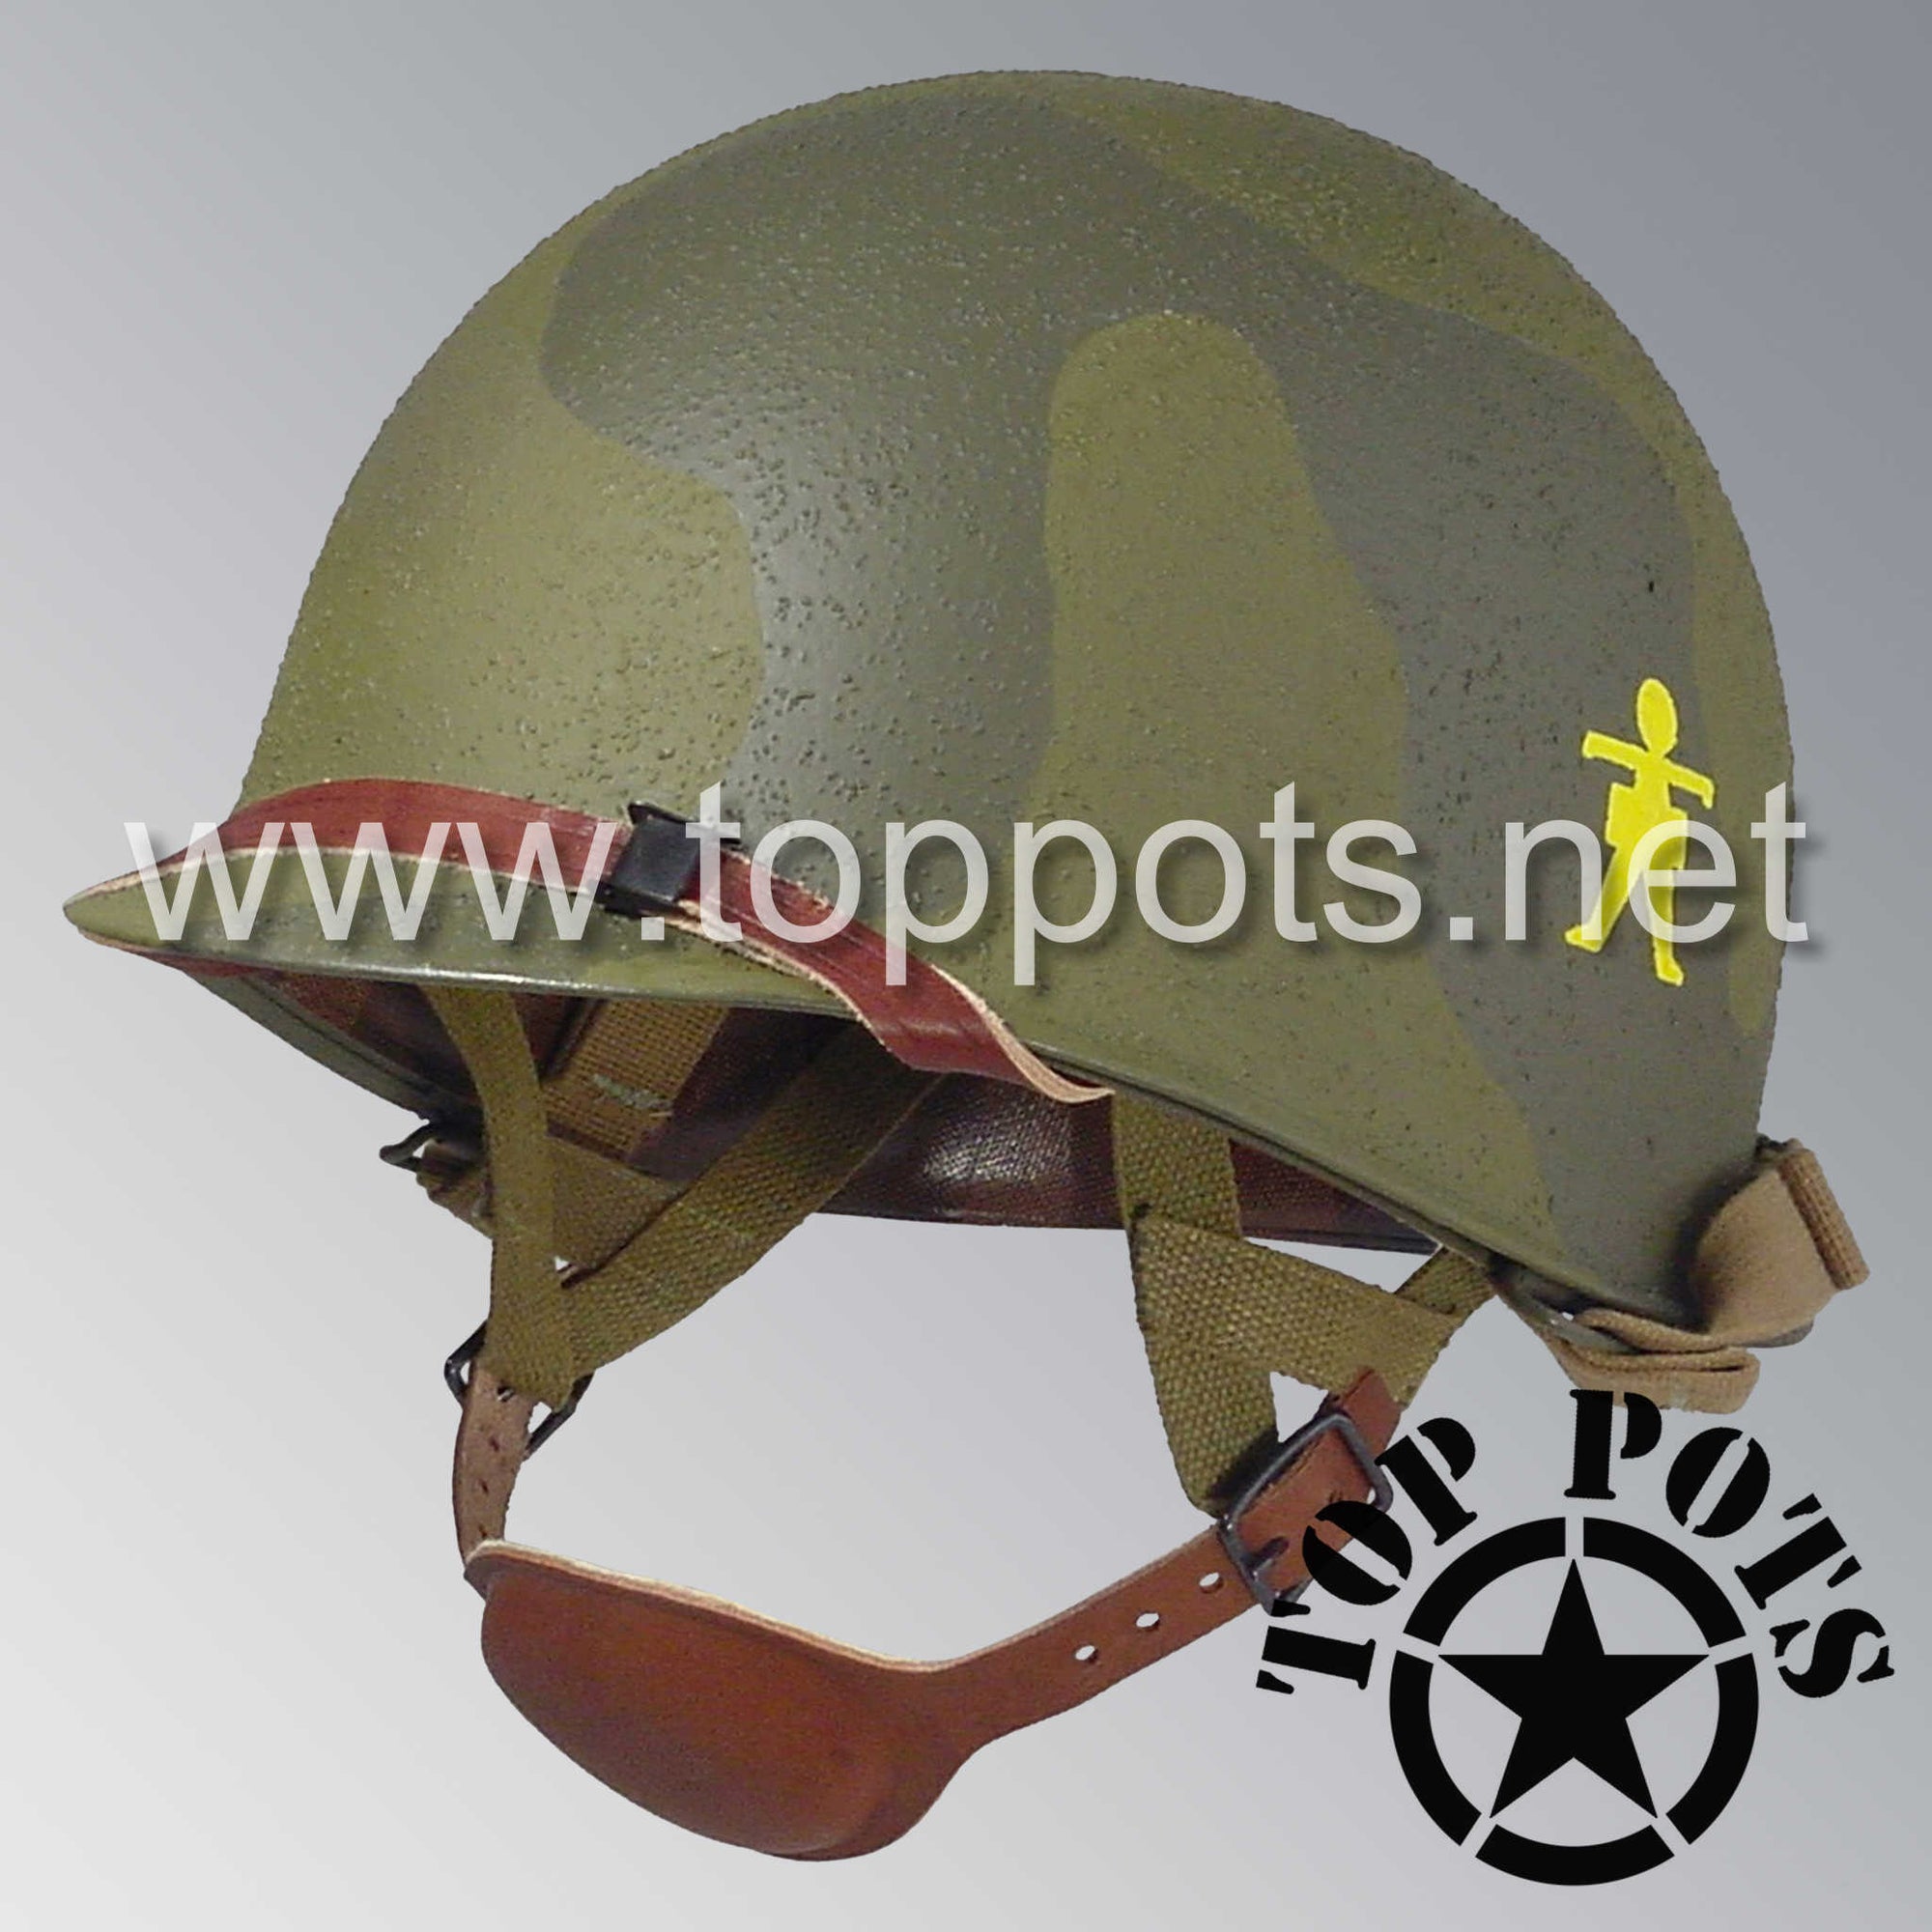 WWII US Army Restored Original M1C Paratrooper Airborne Helmet Swivel Bale Shell and Liner with 509th PIR Pathfinder Camouflage Emblem